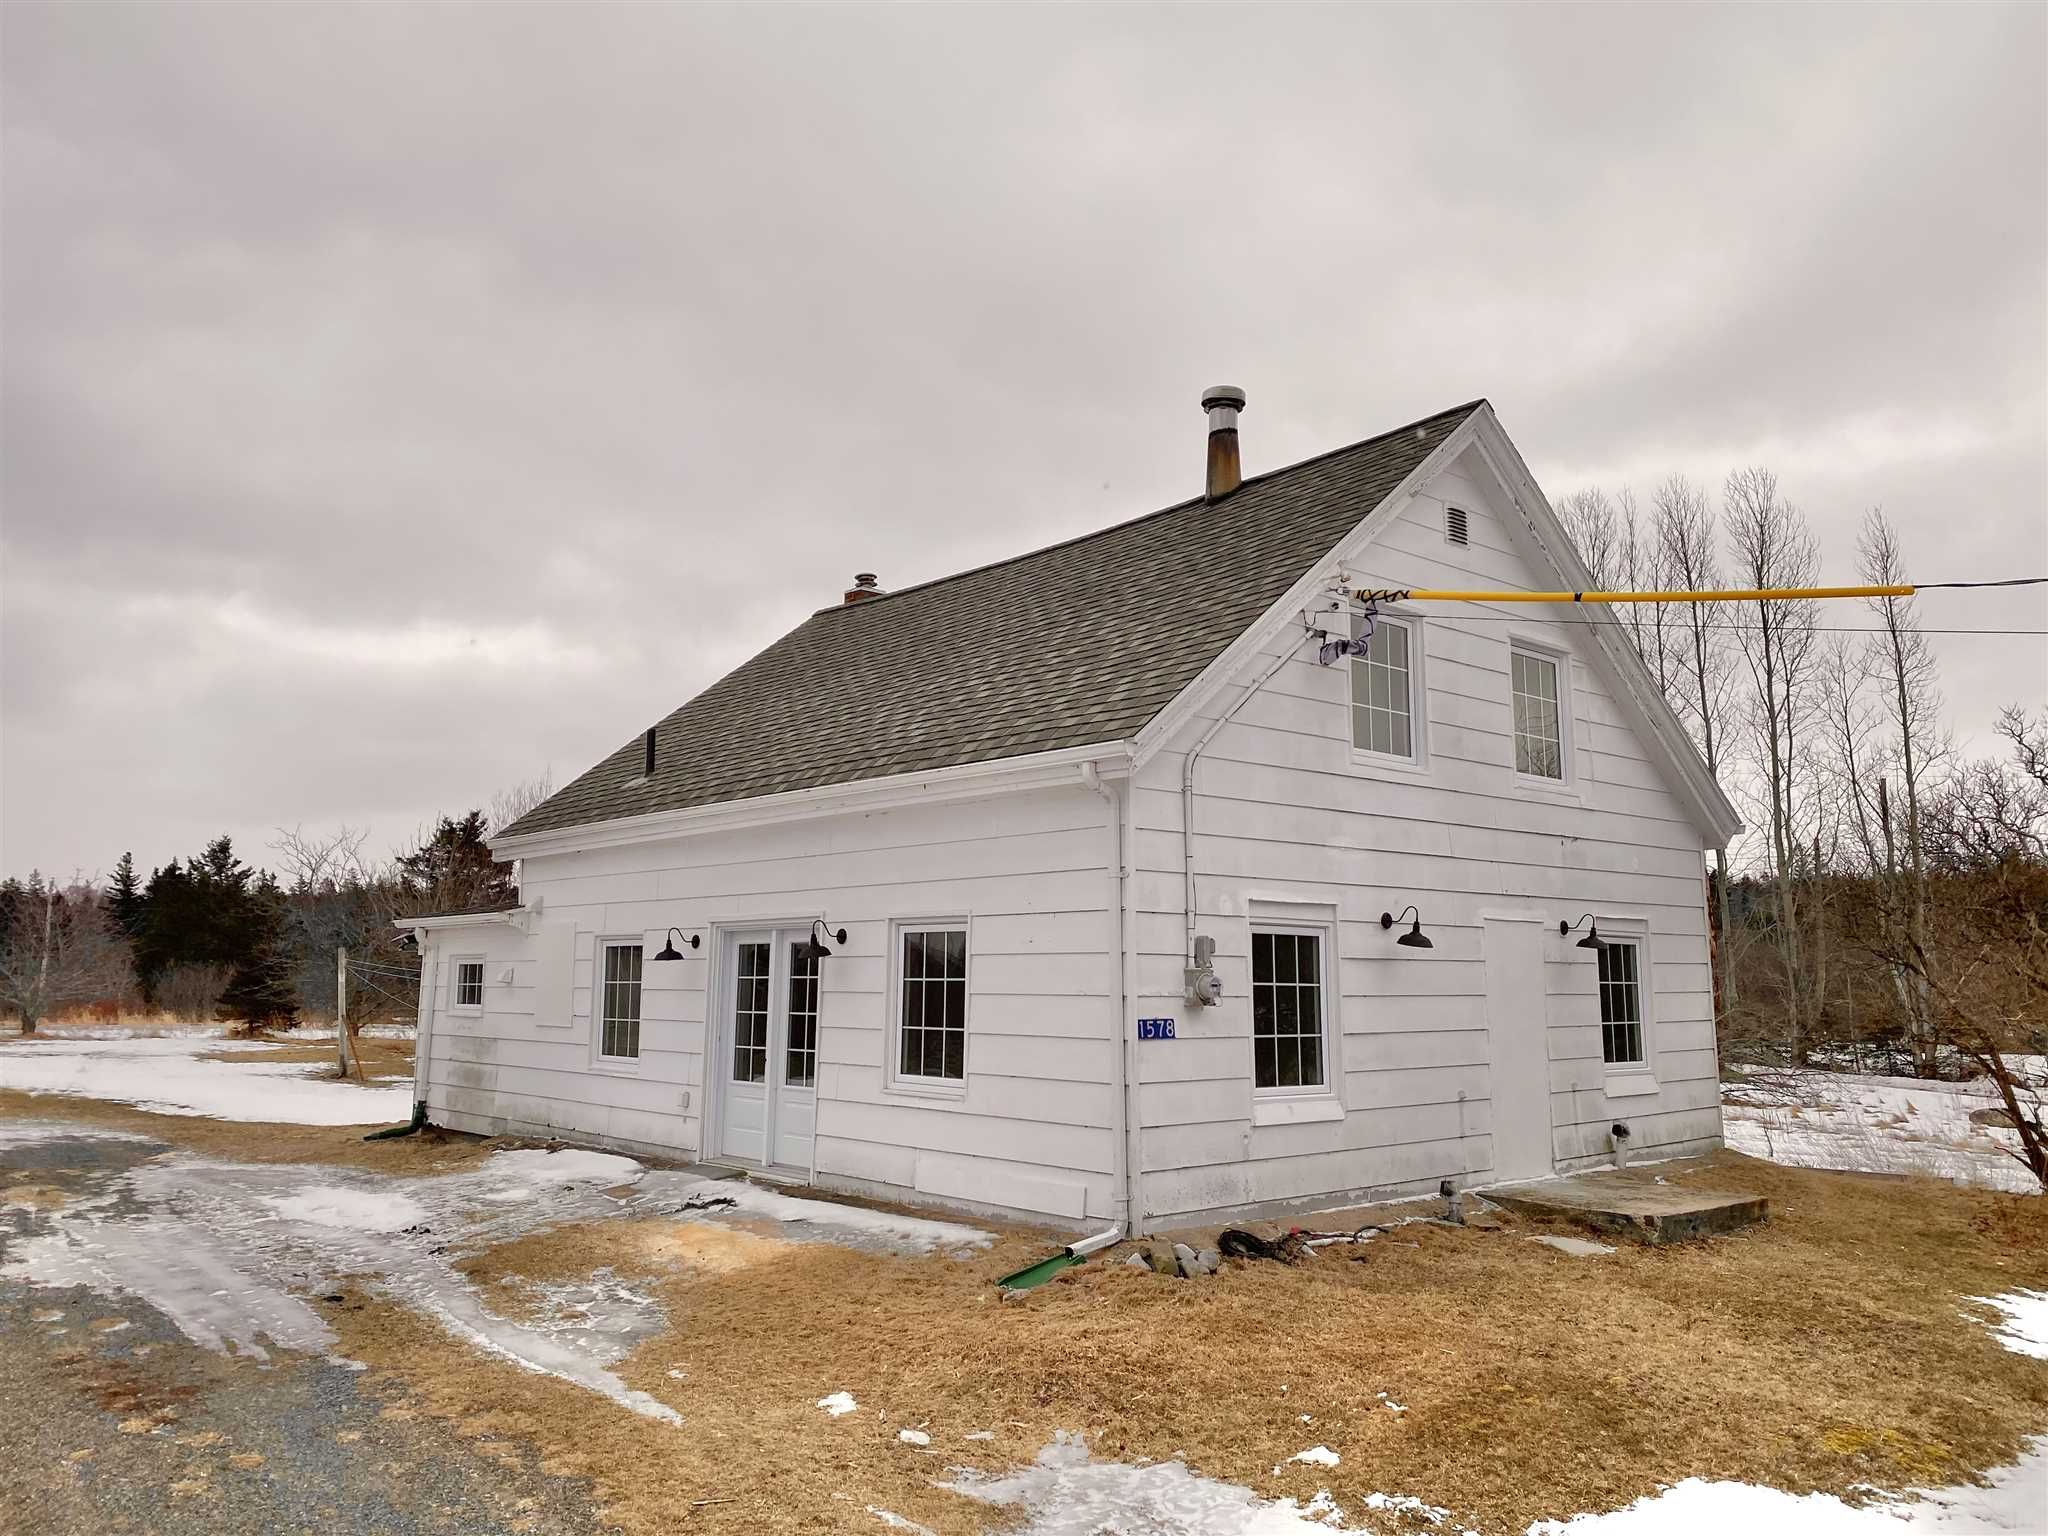 Main Photo: 1578 Baxters Harbour Road in Baxters Harbour: 404-Kings County Residential for sale (Annapolis Valley)  : MLS®# 202104182